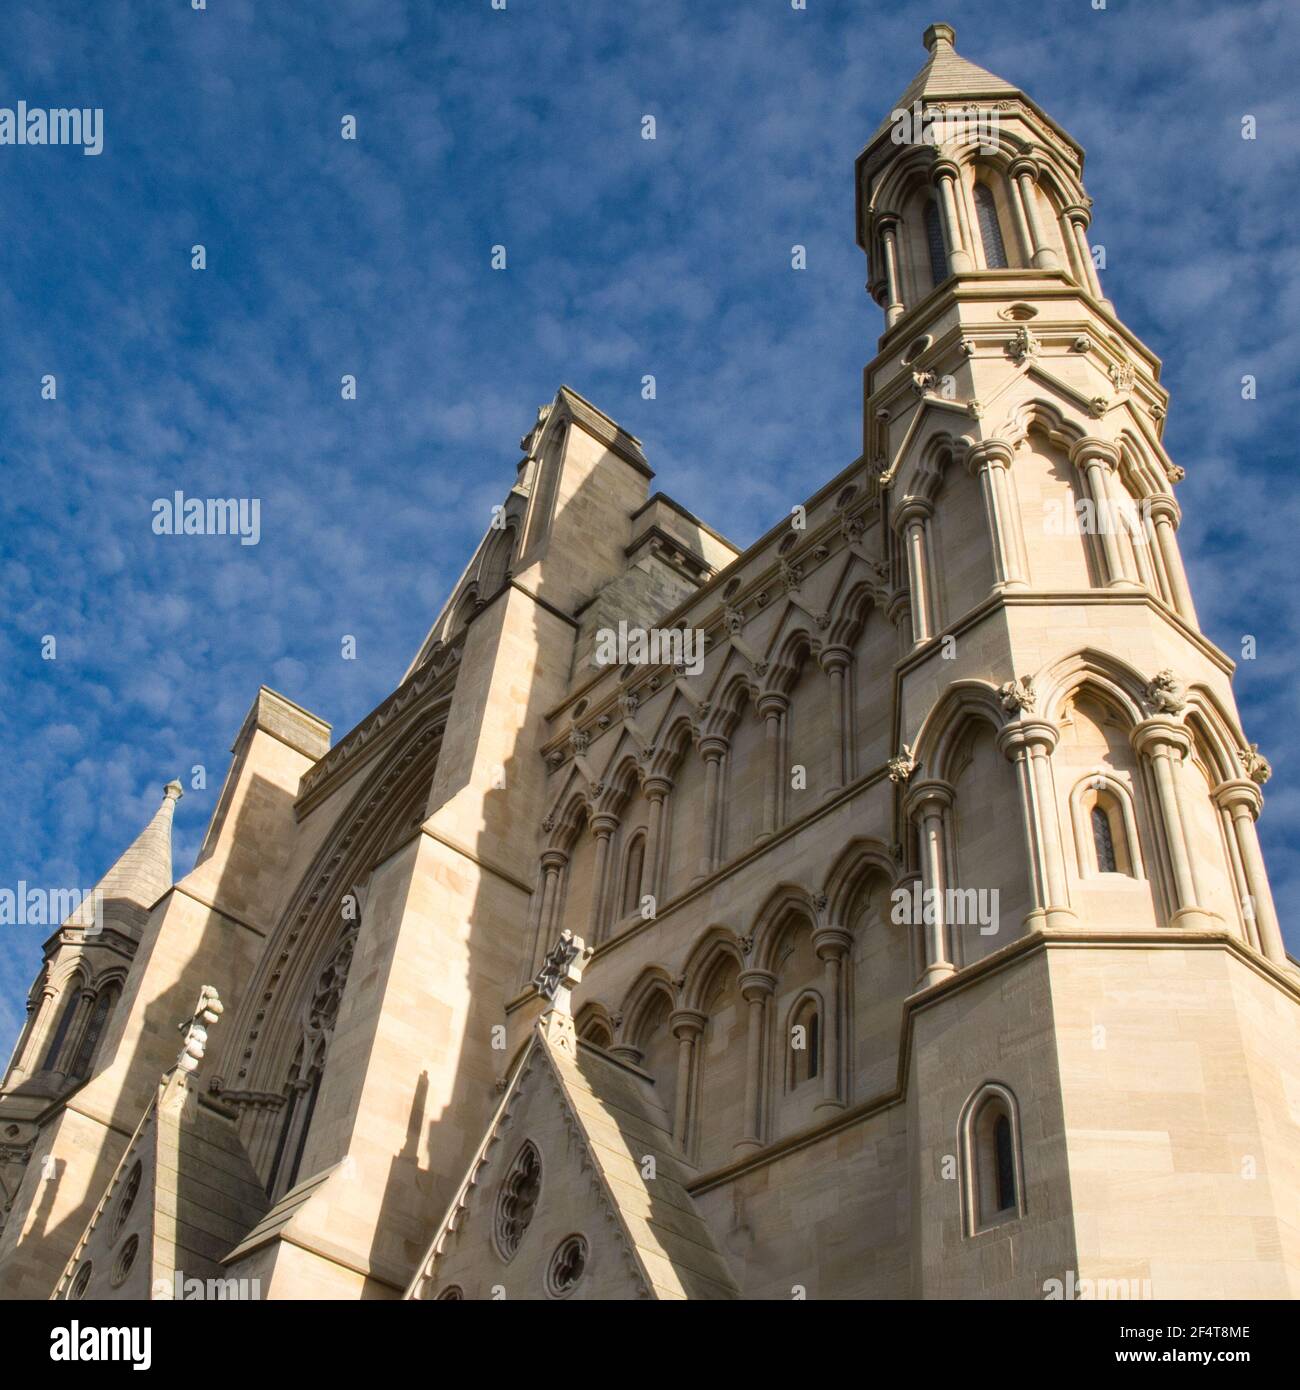 ST. ALBANS, UNITED KINGDOM - Nov 19, 2017: A detail of the impressive Norman architecture of St. Albans Cathedral in St. Albans, England. Stock Photo